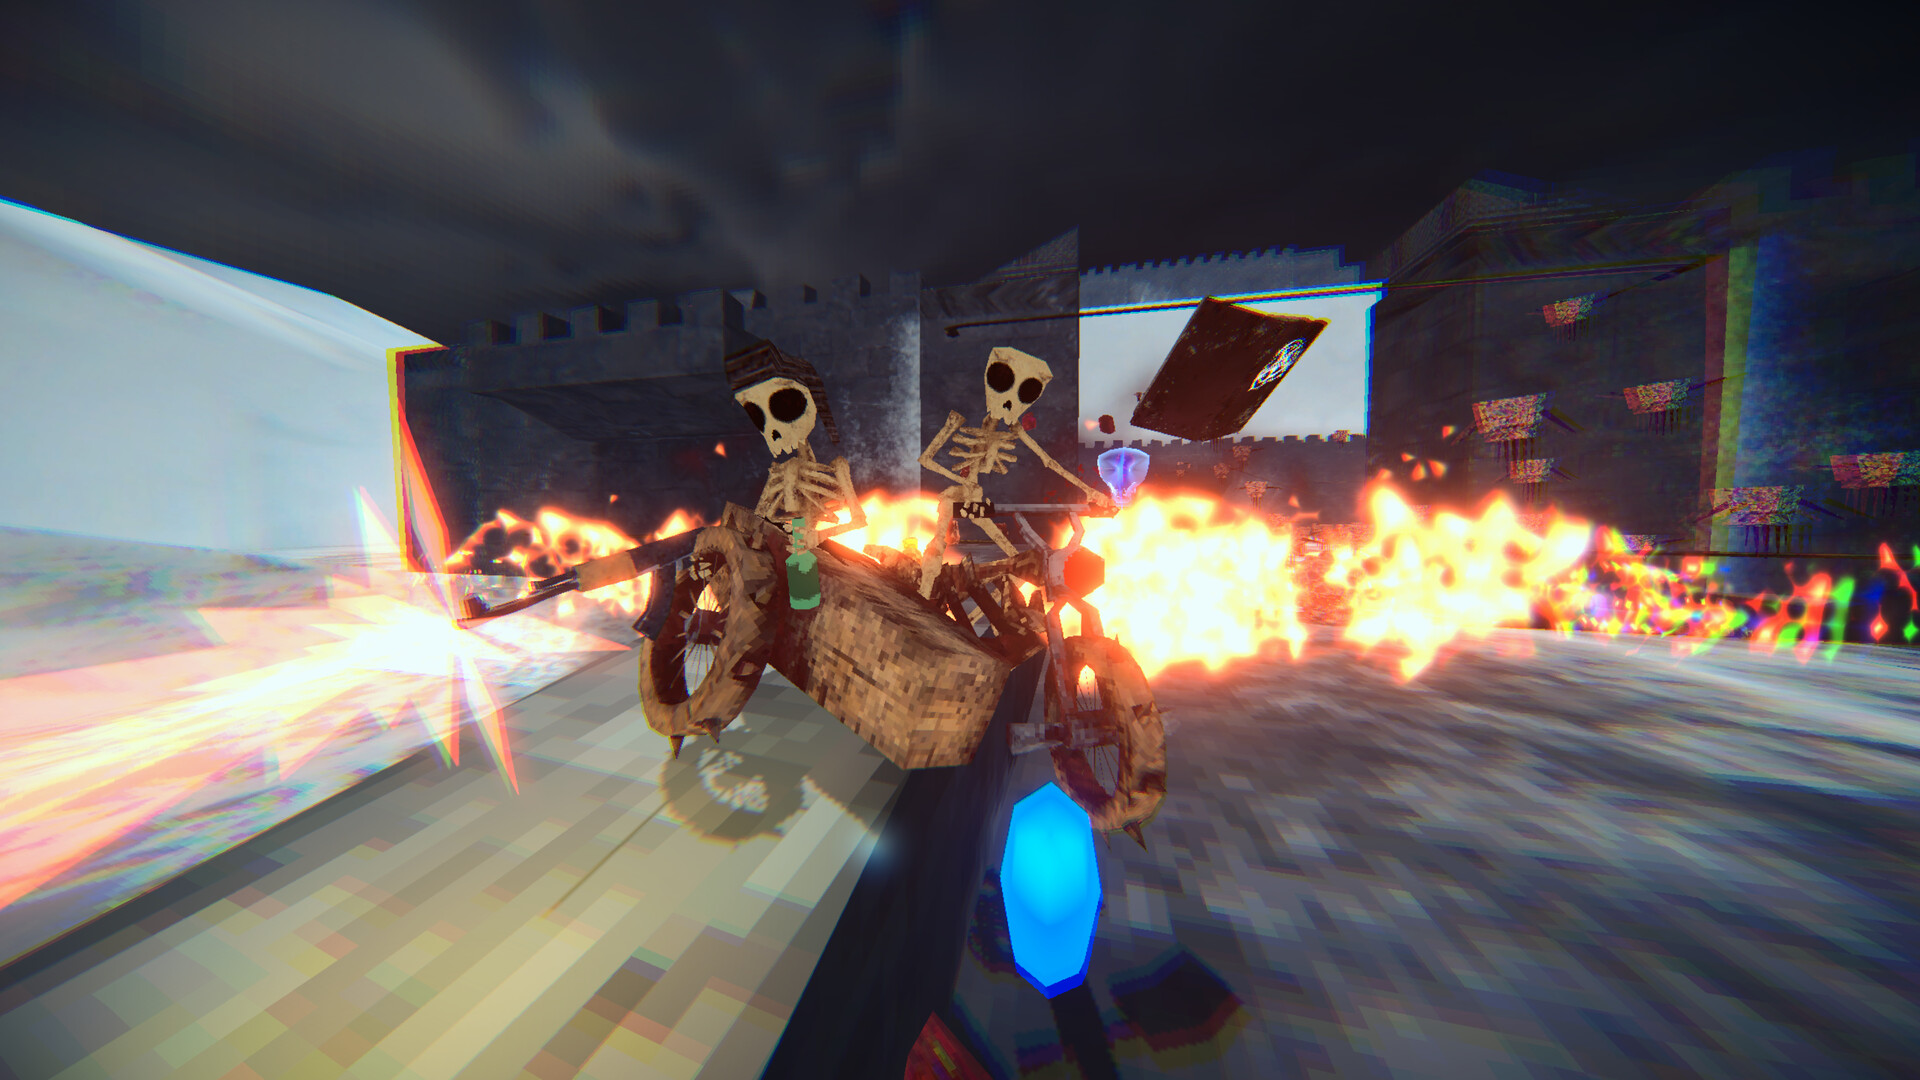  Motordoom is a 'freestyle-sports roguelite horde shooter' about skeletons on motorcycles 